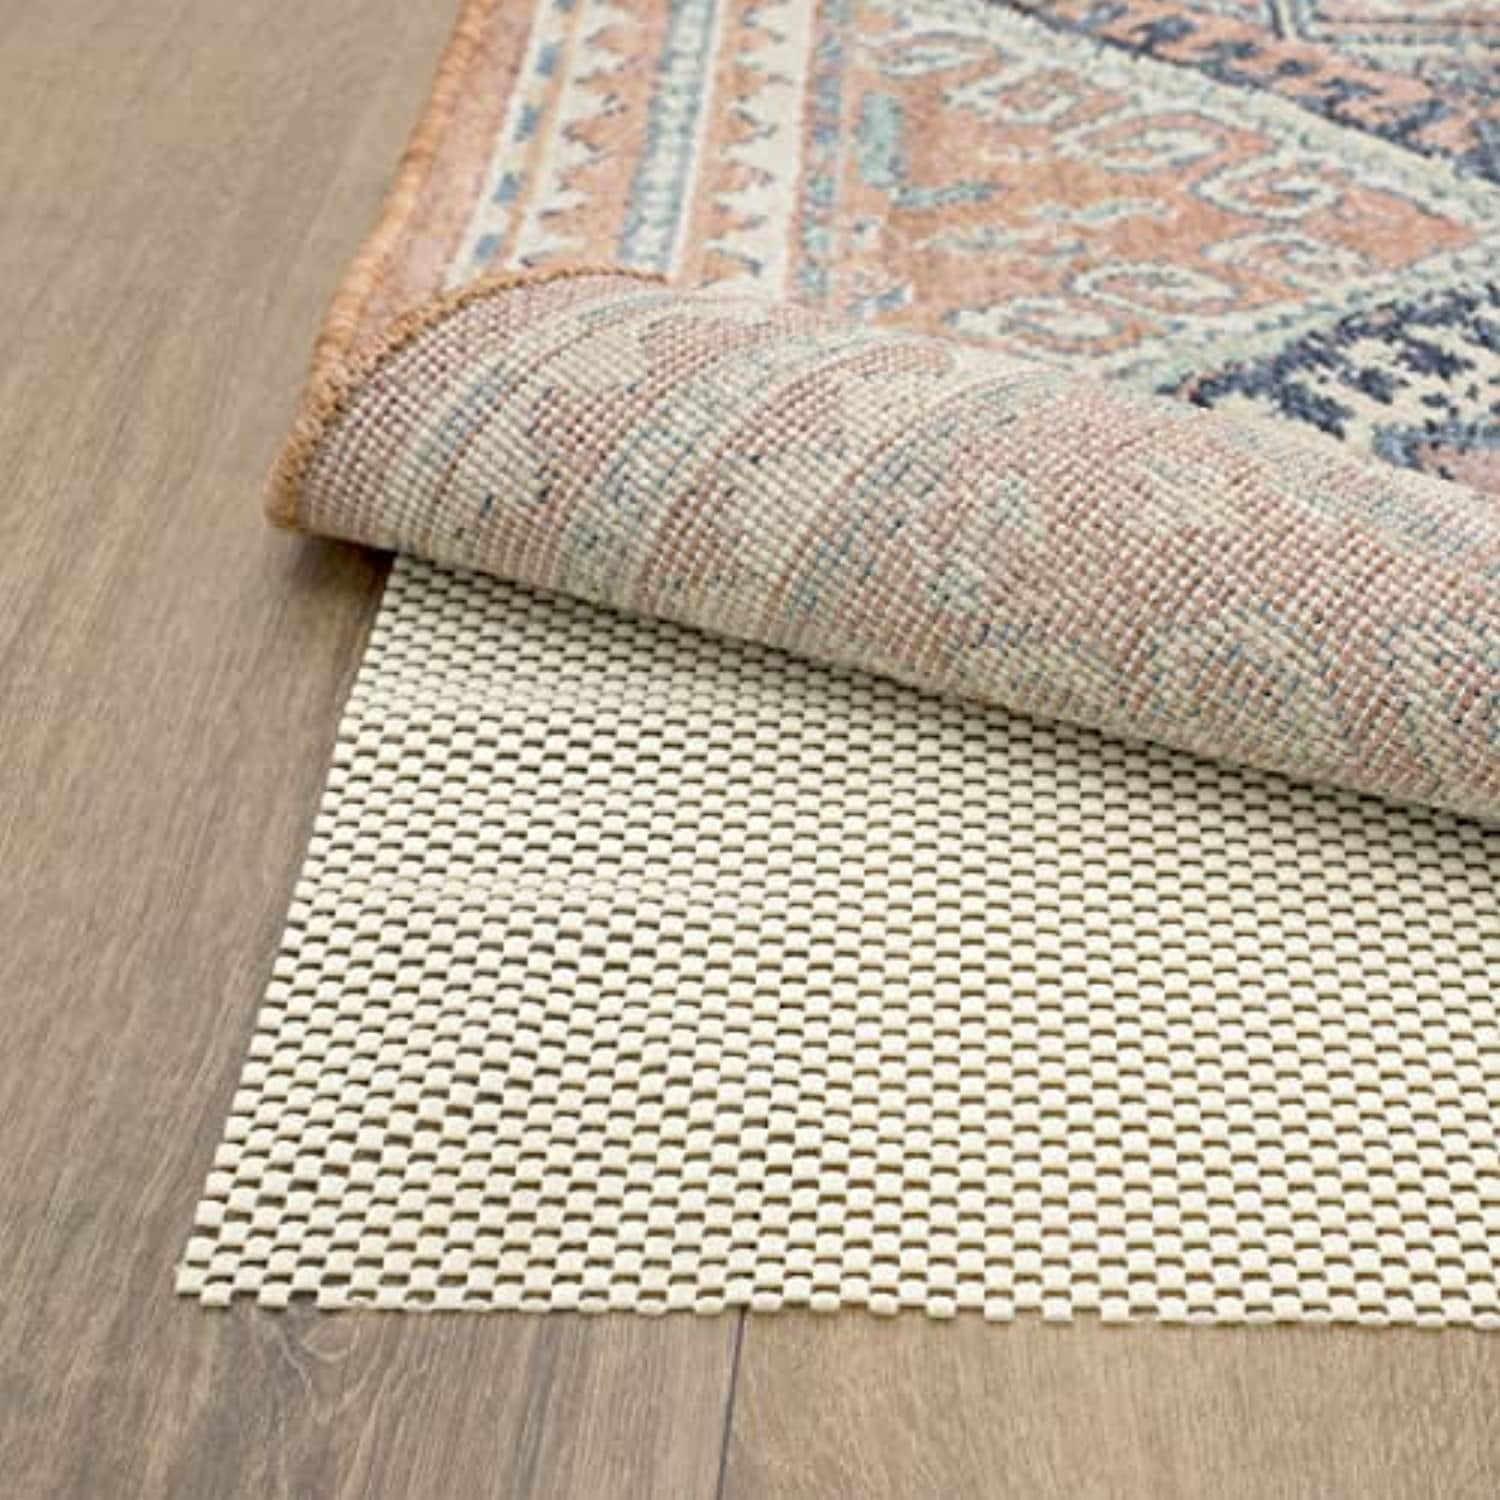  Grip-It Super Natural Cushioned Non-Slip Rug Pad for Area Rugs  and Runner Rugs, Rug Gripper for Hardwood Floors 3x5 ft : Home & Kitchen